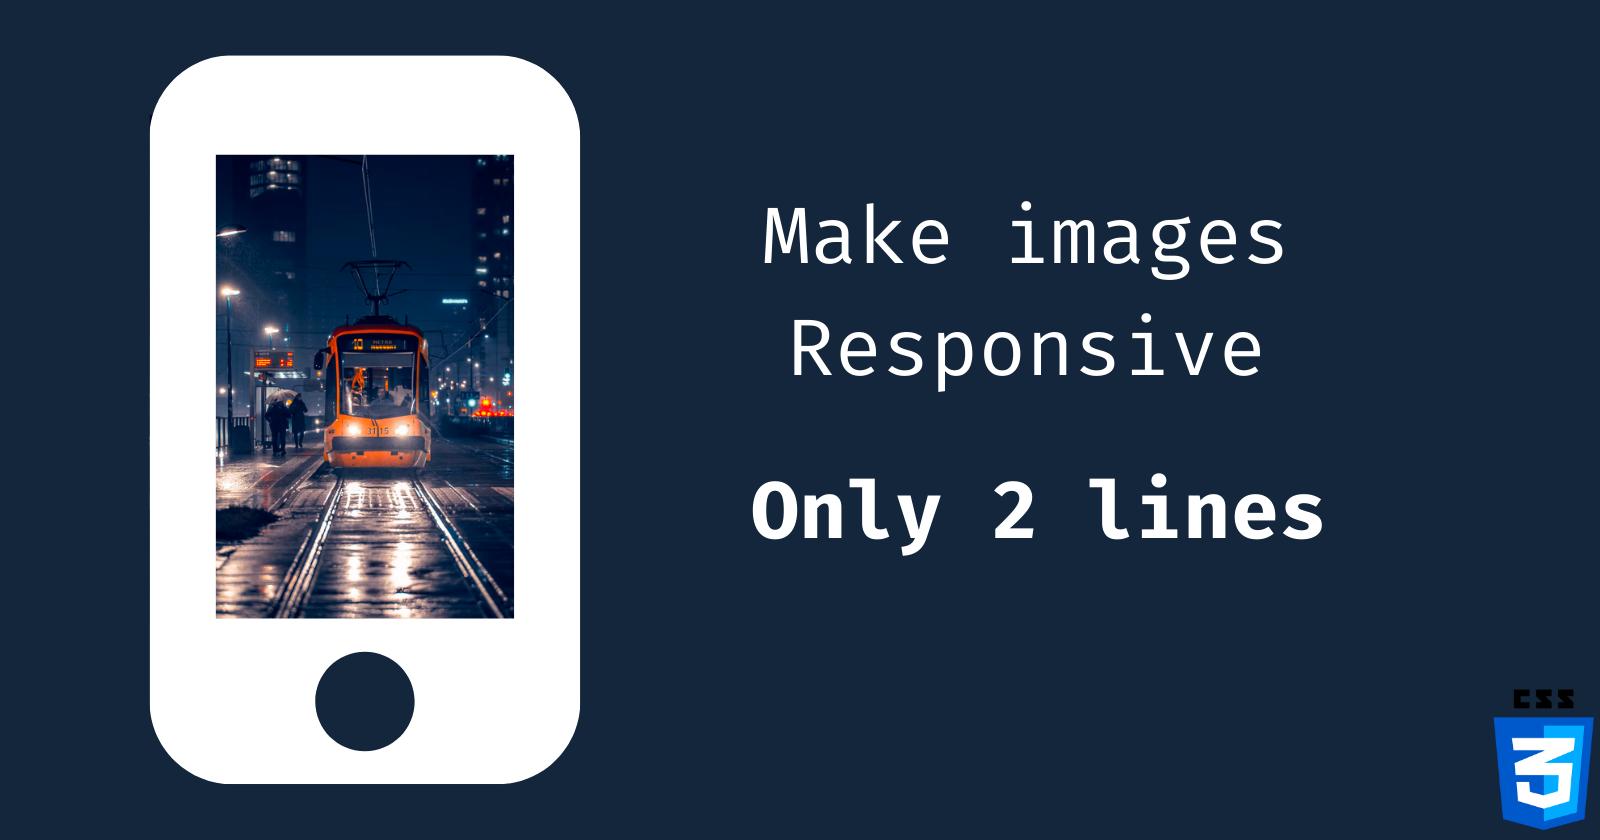 This is how you make images Responsive in CSS